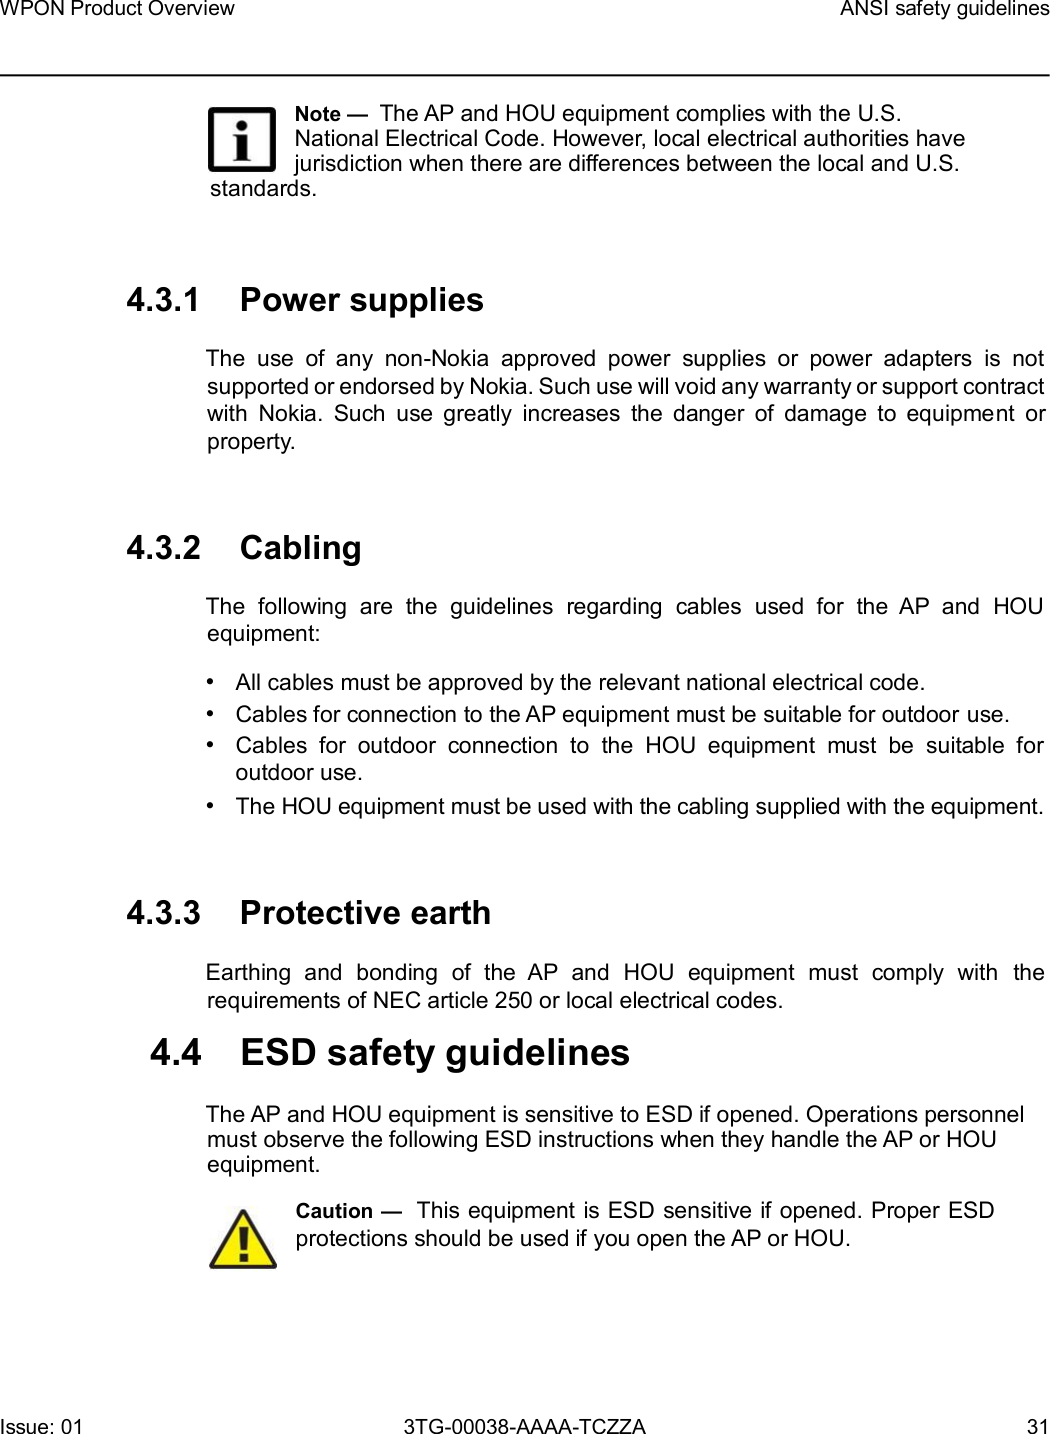 Page 31 of Nokia Bell 7577WPONAPED WPON User Manual WPON Product Overview